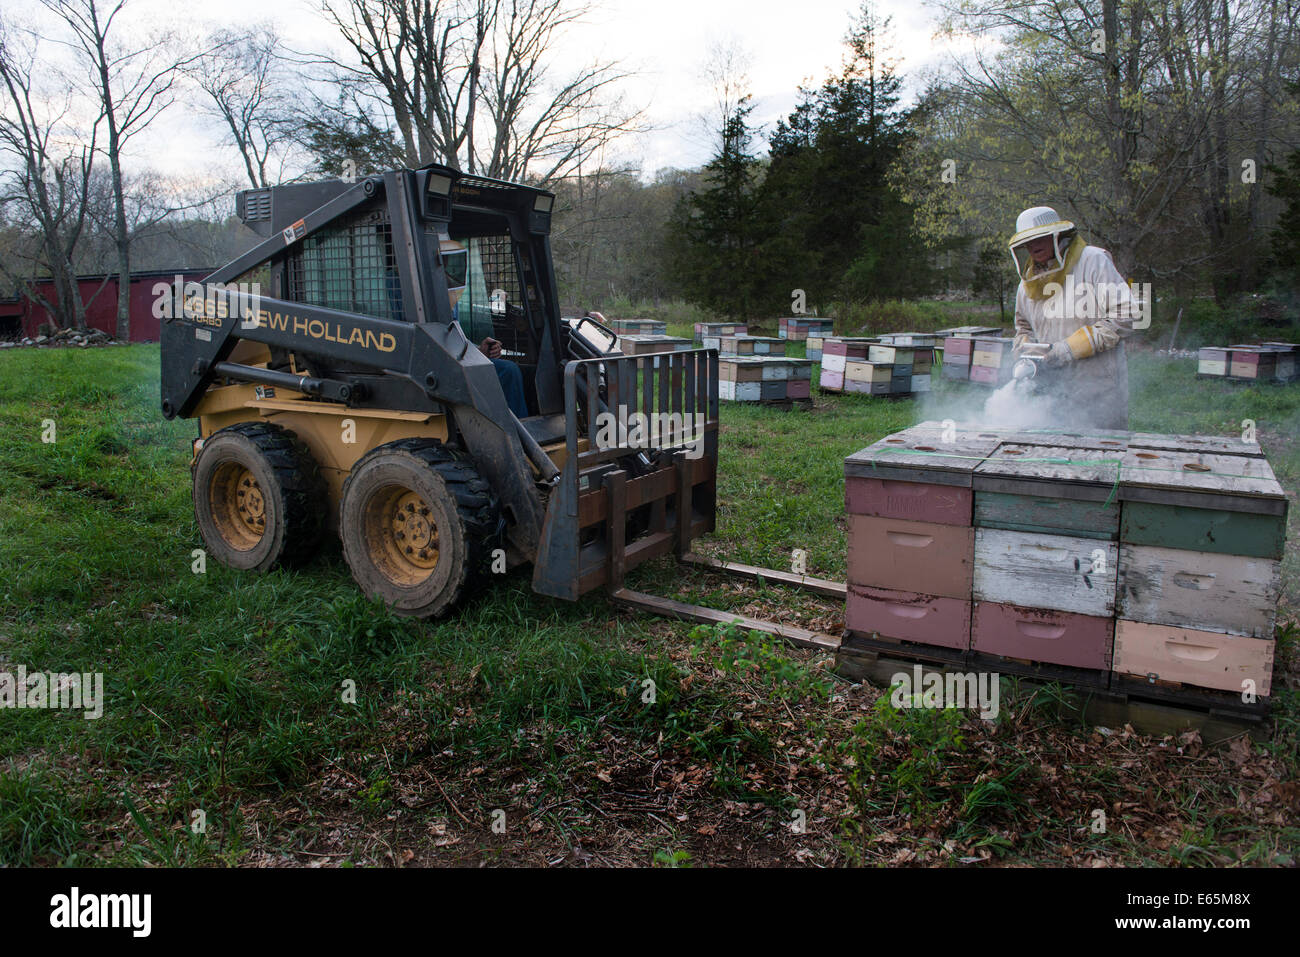 Rollie Hannan, Jr., beekeeper,and his father, with smoker, use steer skid loader to load hives onto flat bed truck for delivery. Stock Photo